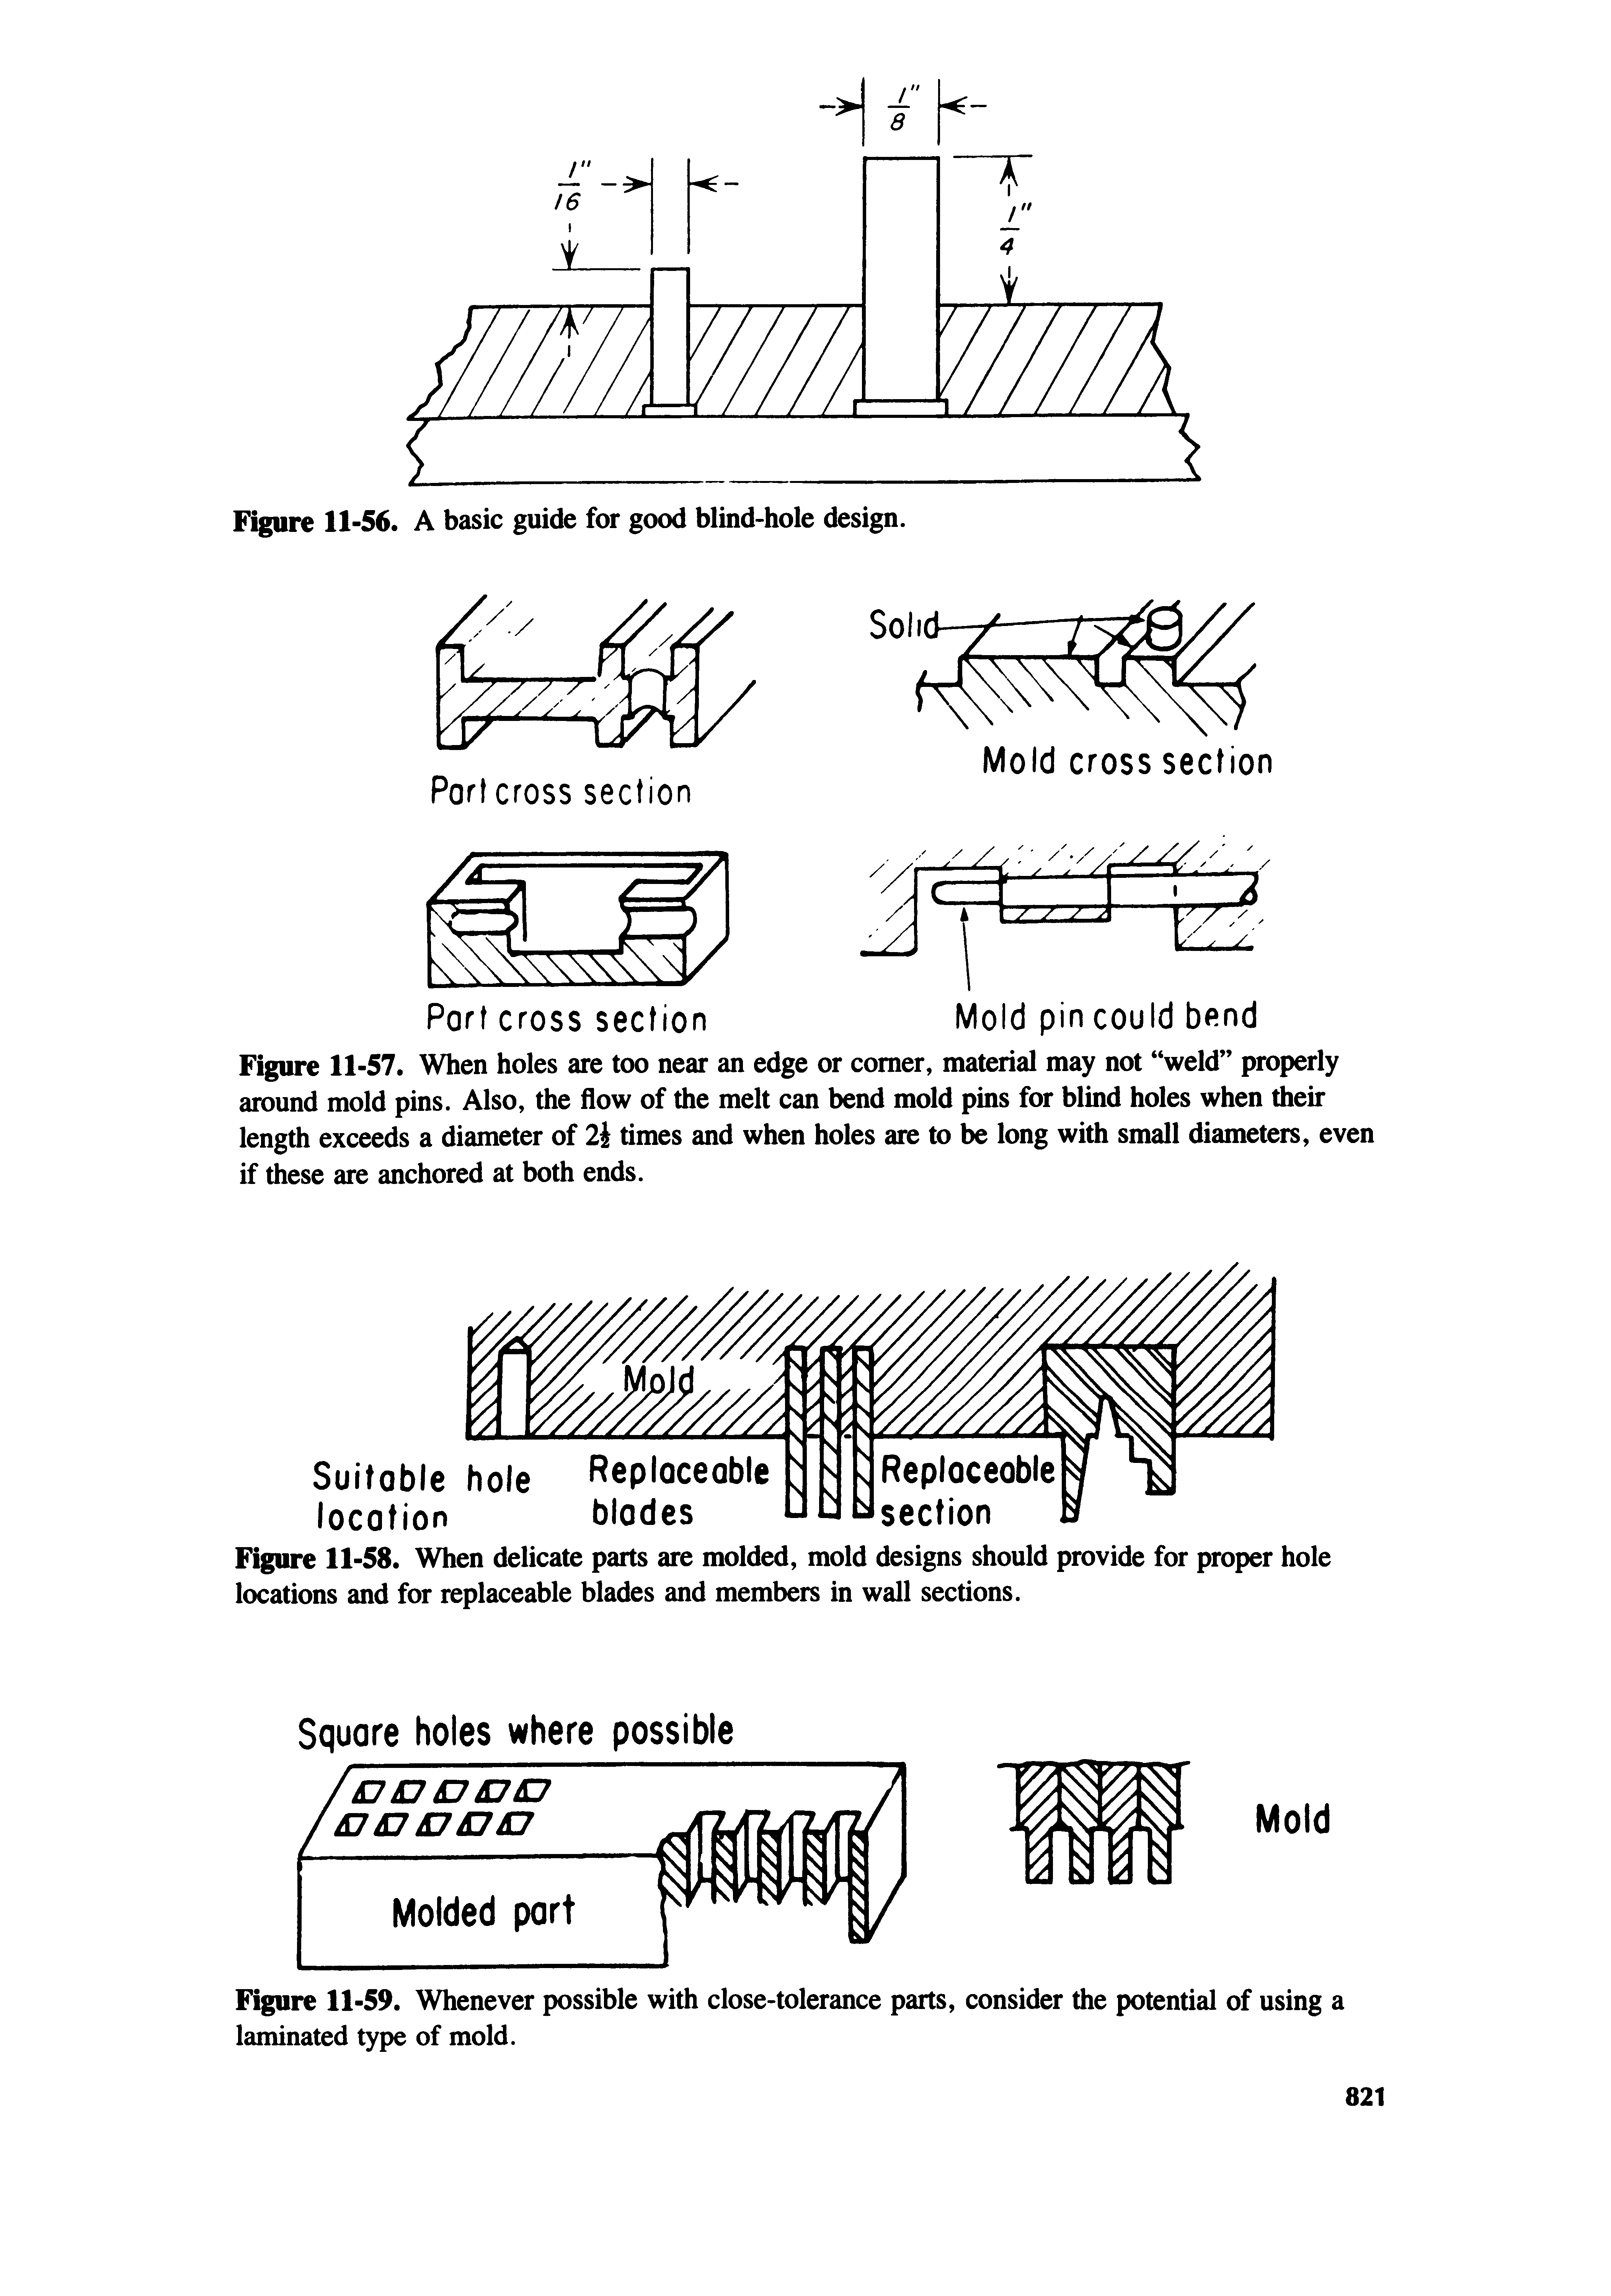 Figure 11-57. When holes are too near an edge or comer, material may not weld properly around mold pins. Also, the flow of the melt can bend mold pins for blind holes when then-length exceeds a diameter of 2i times and when holes are to be long with small diameters, even if these are anchored at both ends.